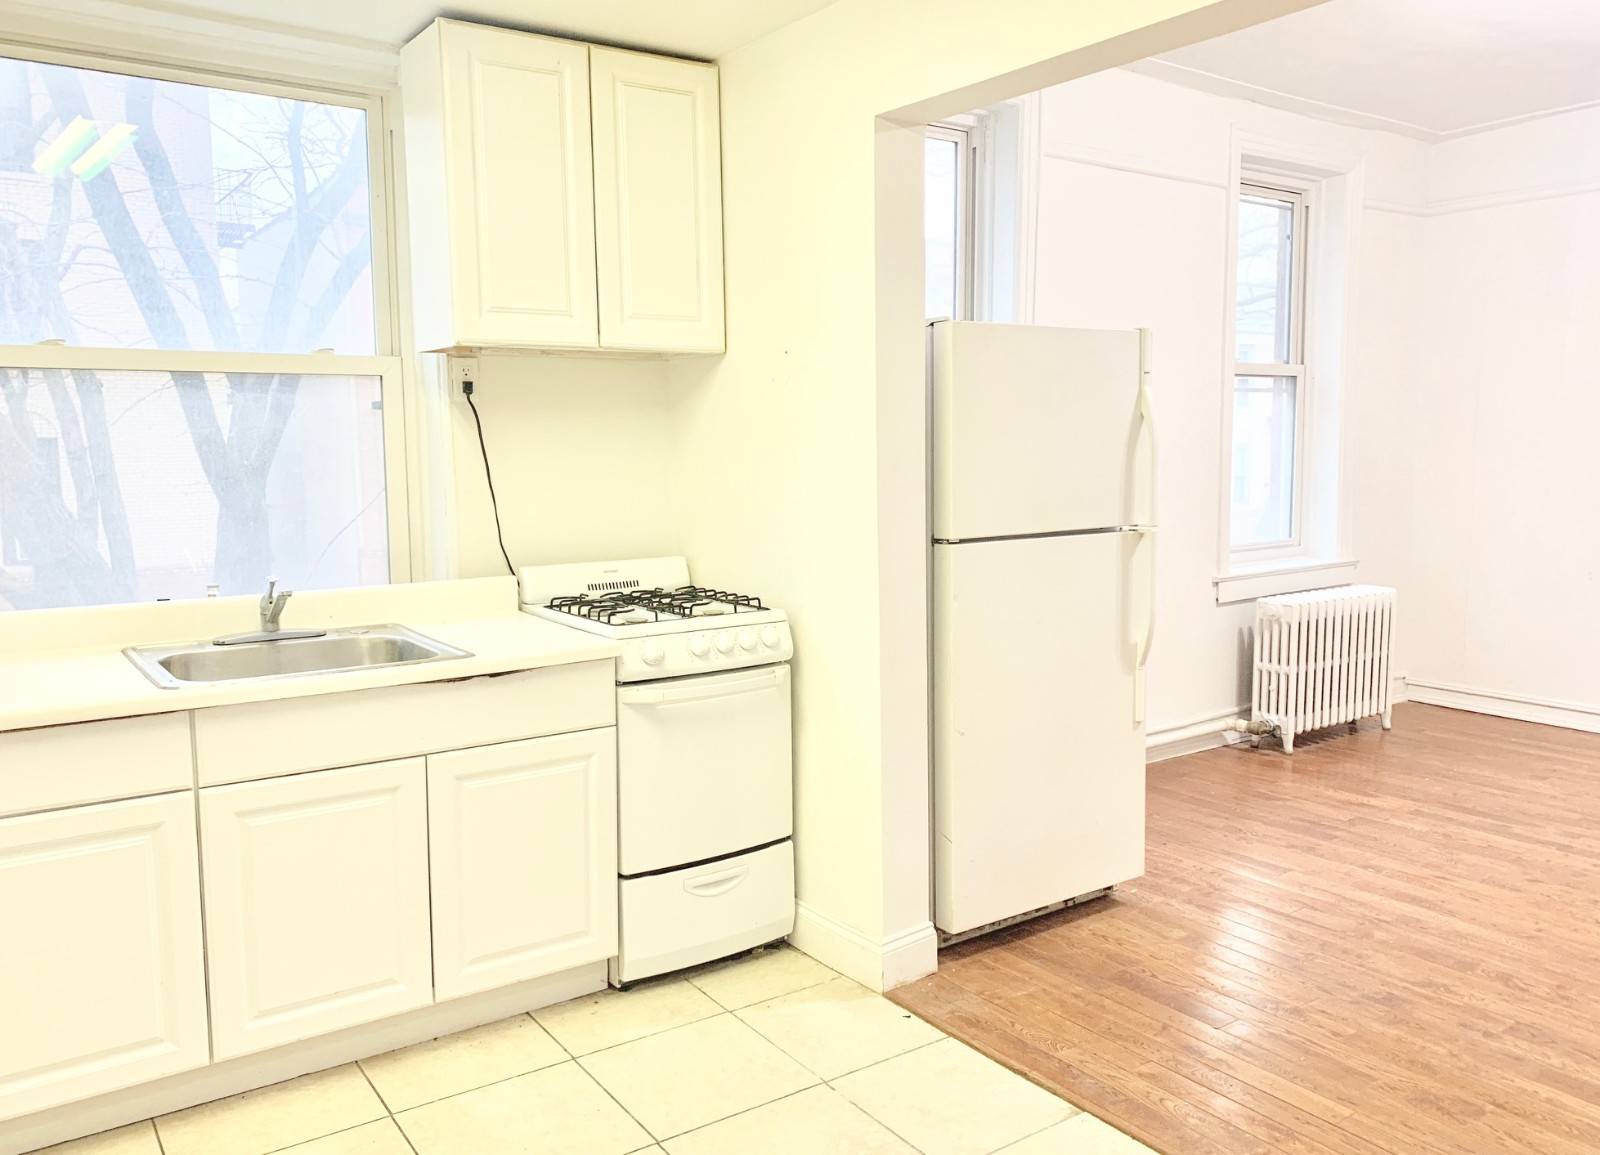 A Beautiful 2 Bedroom Apartment with eat in kitchen.